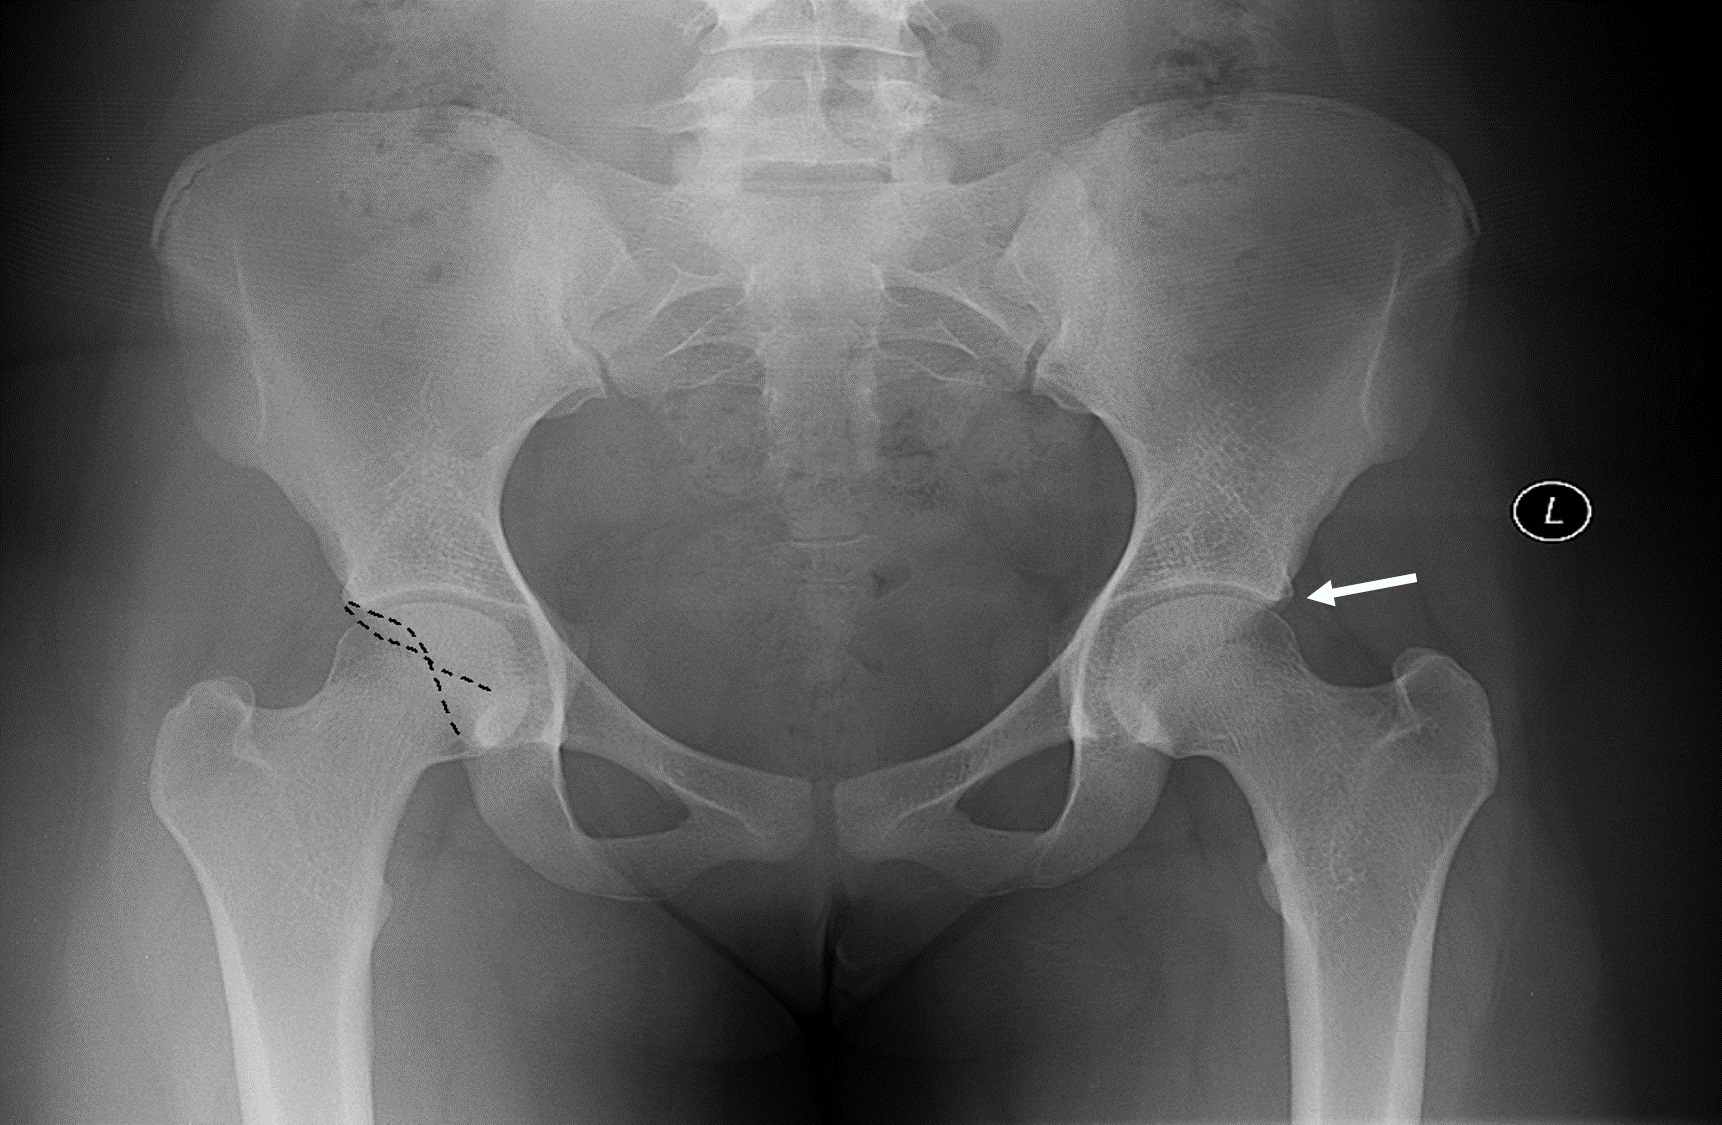 Pelvis x-ray demonstrating a pincer lesion of the left hip (indicated by white arrow). Right hip has dashed lines outlining the anterior and posterior walls of the acetabulum demonstrating a crossover sign indicative of a retroverted acetabulum.